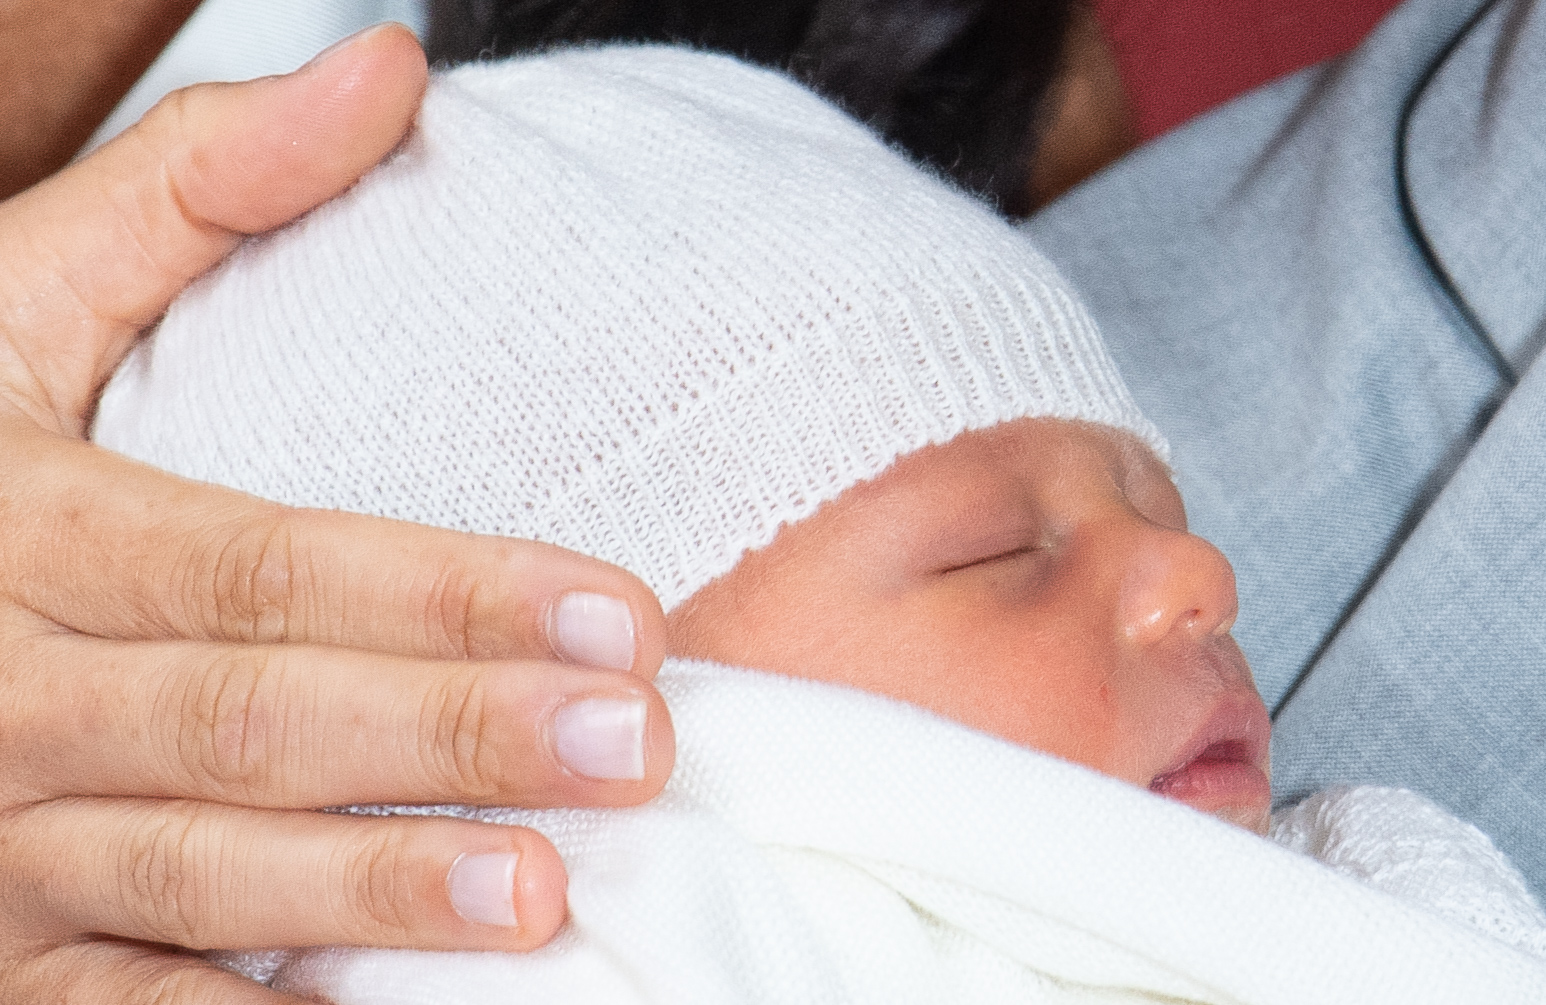 Meghan, Duchess of Sussex, places her hand on the baby's head.